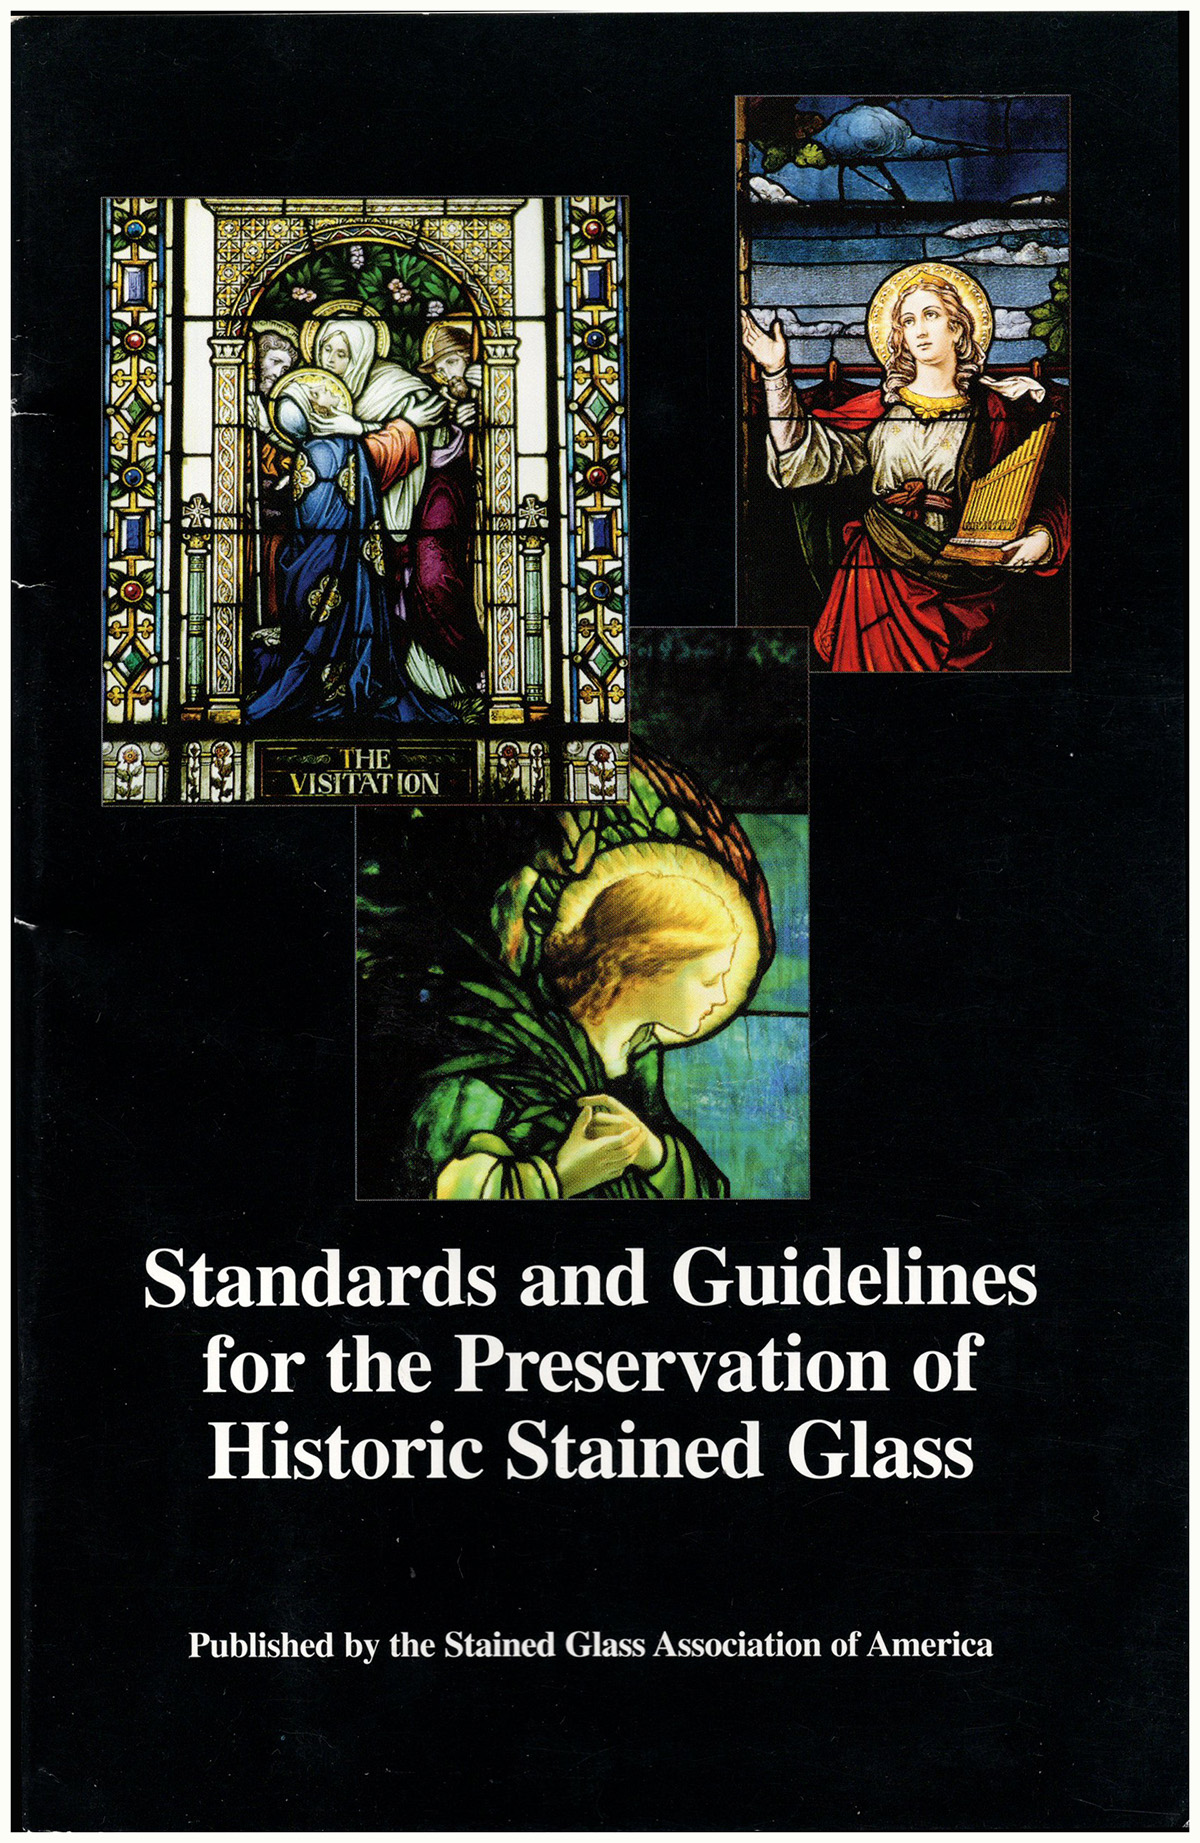 Stained Glass Association of America - Standards and Guidelines for the Preservation of Historic Stained Glass